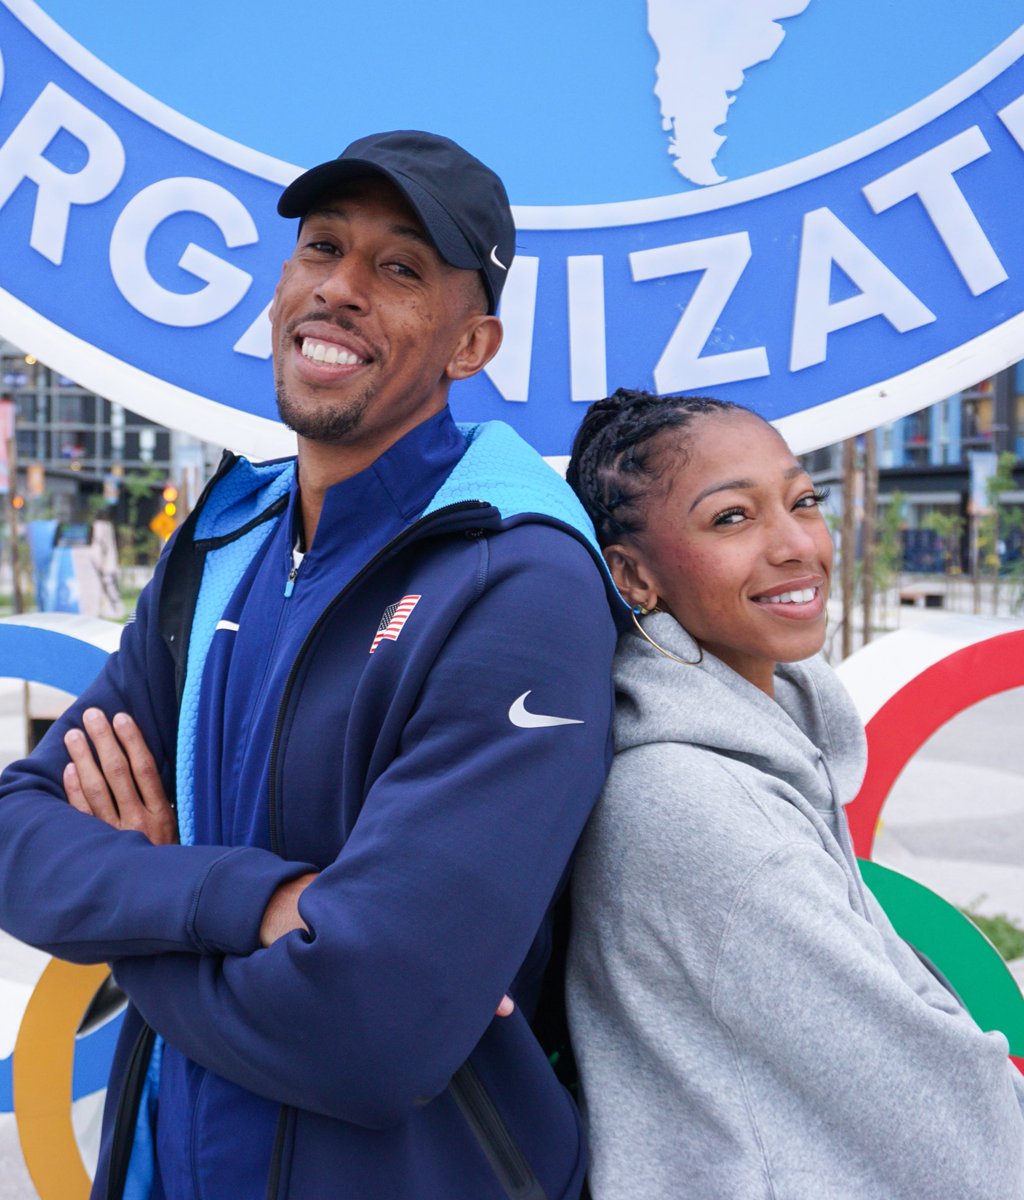 Team USATF checking in from Santiago, Chile📍 Congratulations to our 2023 Pan American Games Team USATF Captains, Chris Benard and Jasmine Todd! #Santiago2023